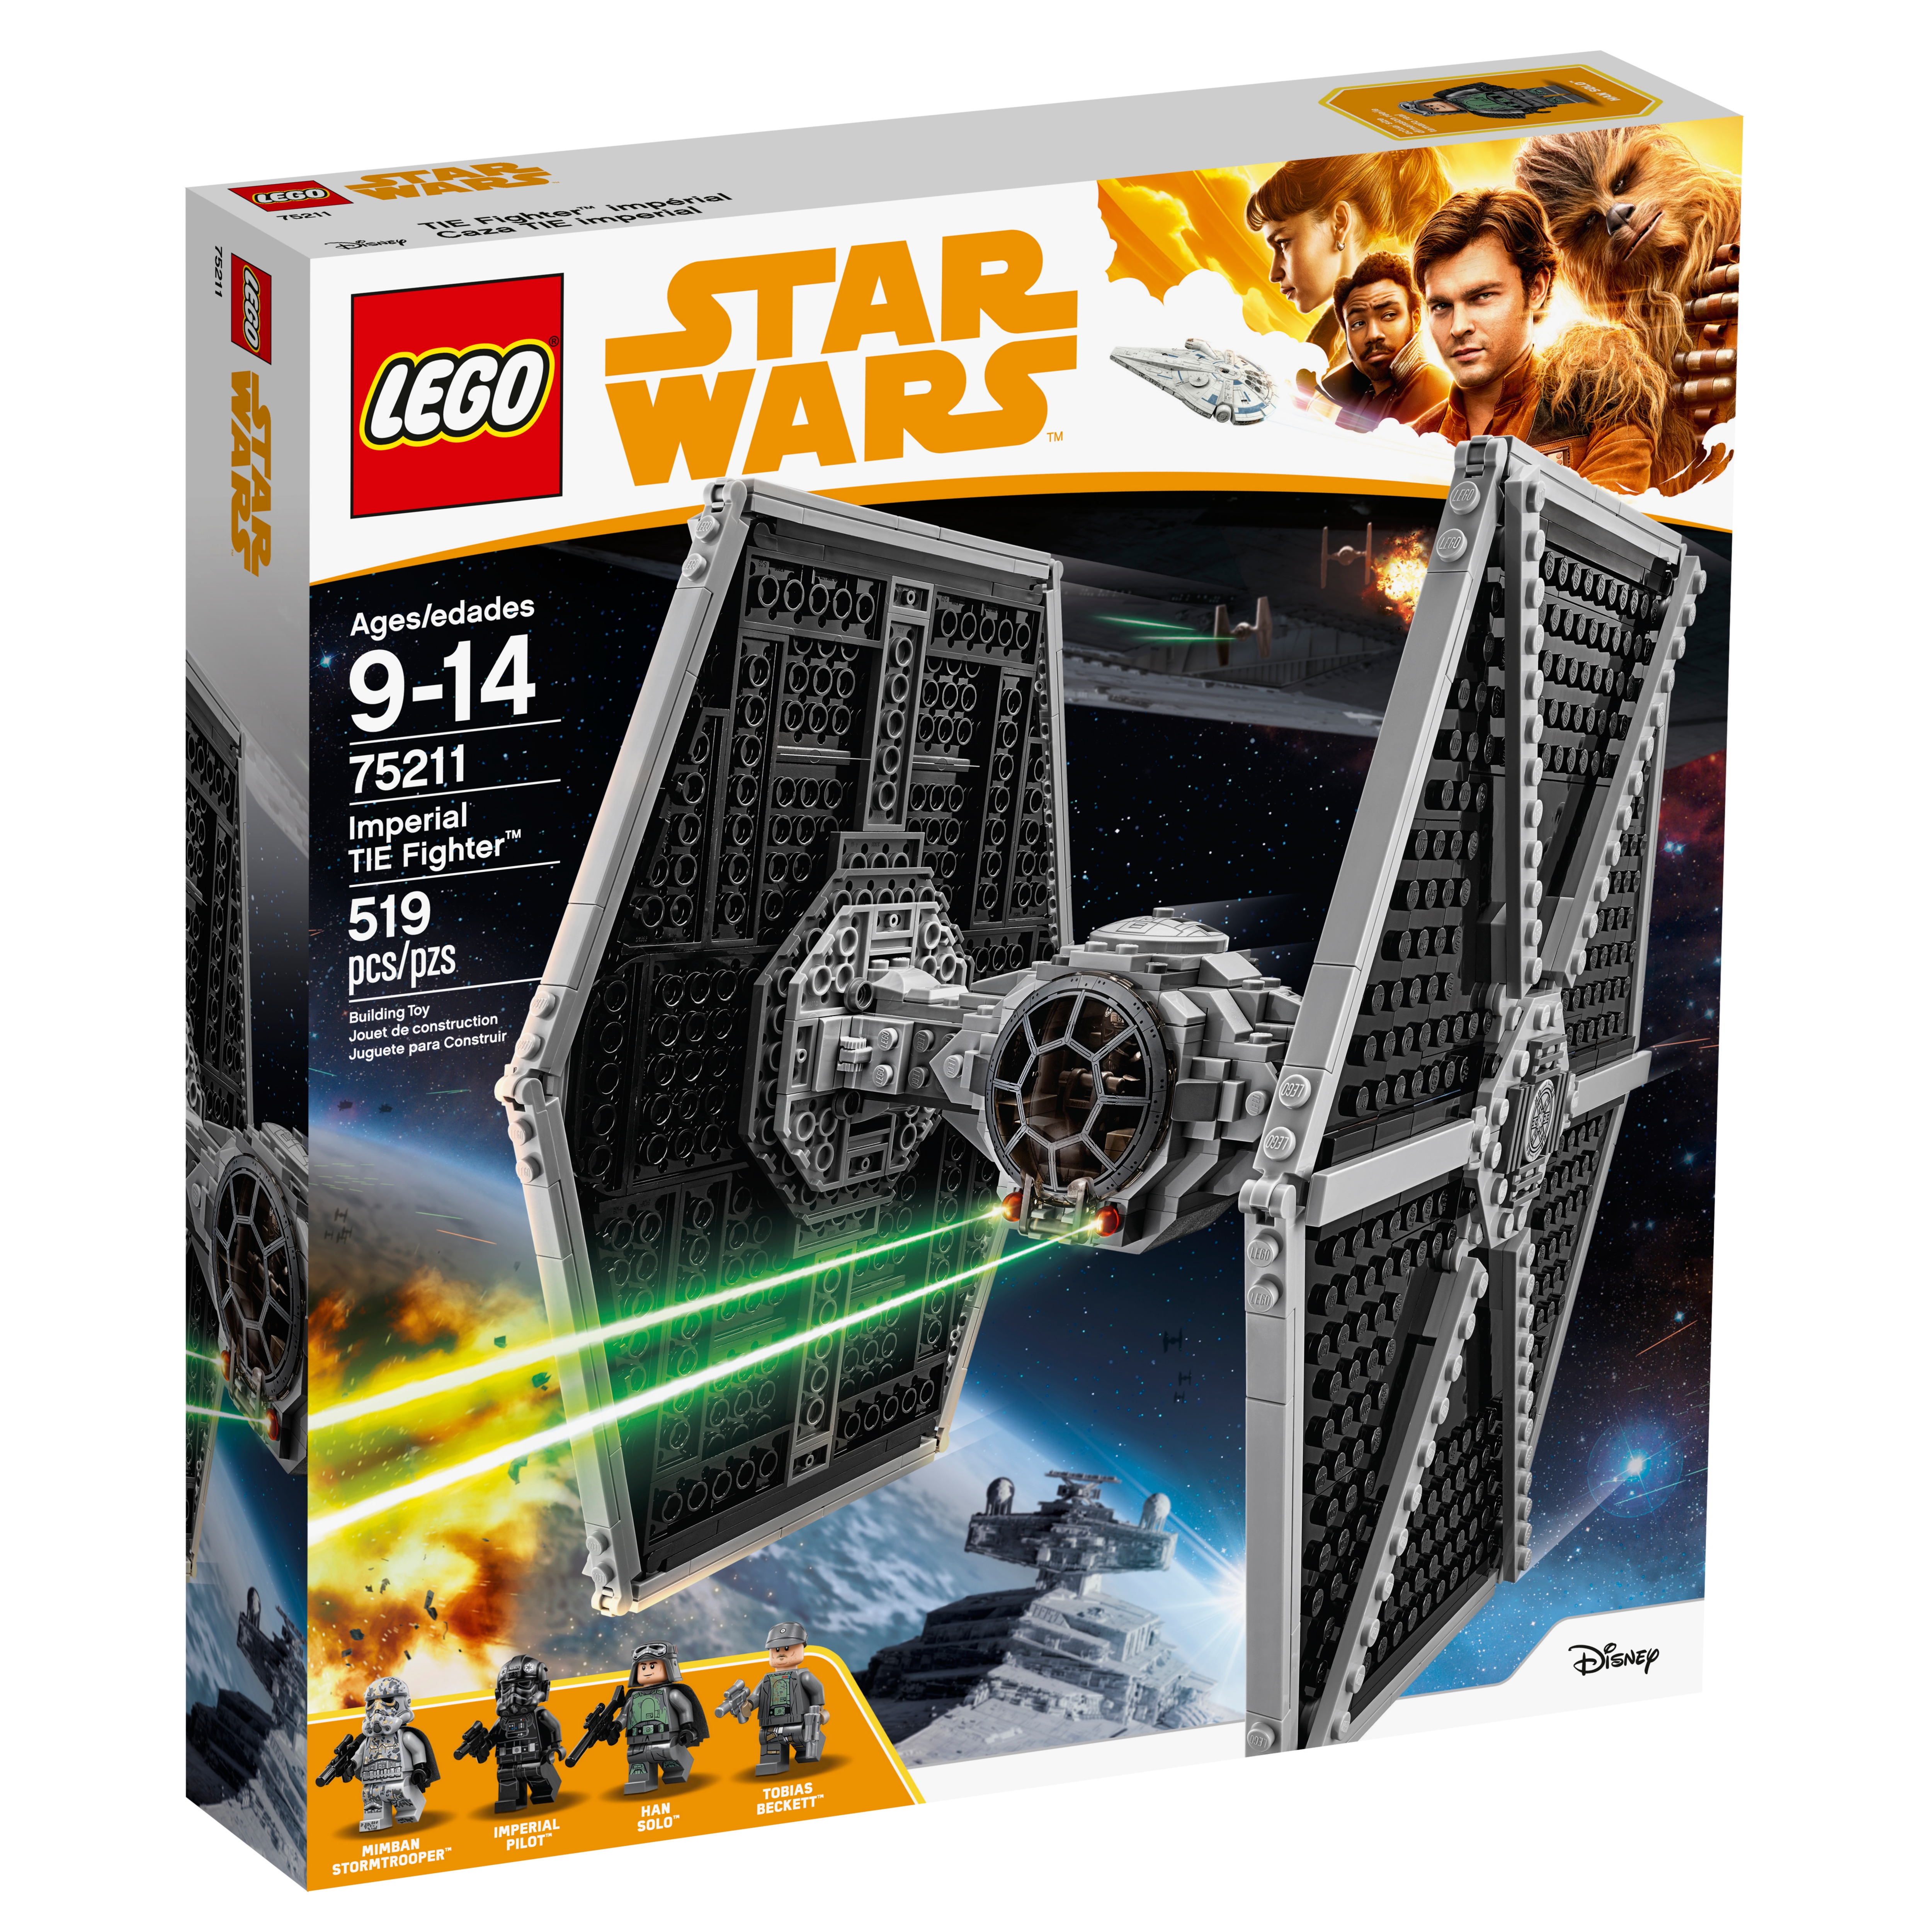 Details about   Building Blocks for Star Wars 75211 Imperial TIE Fighter Bricks Educational Toy 